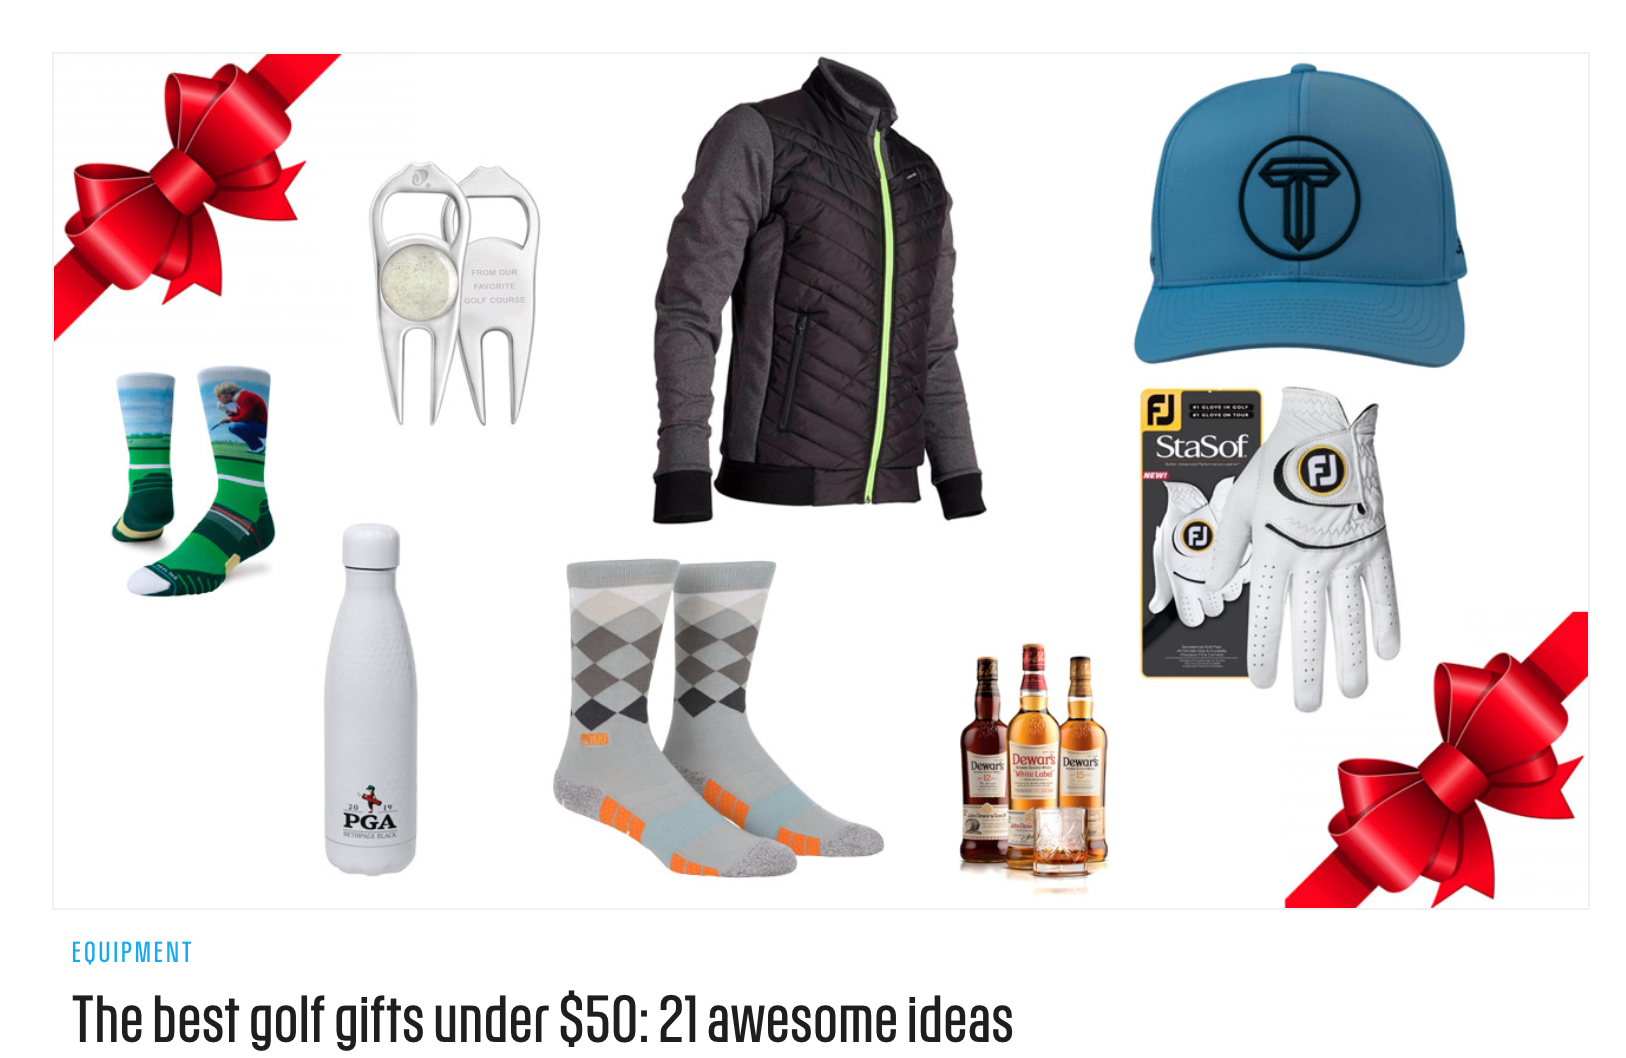 Golf.com Holiday Gift Guide Feature